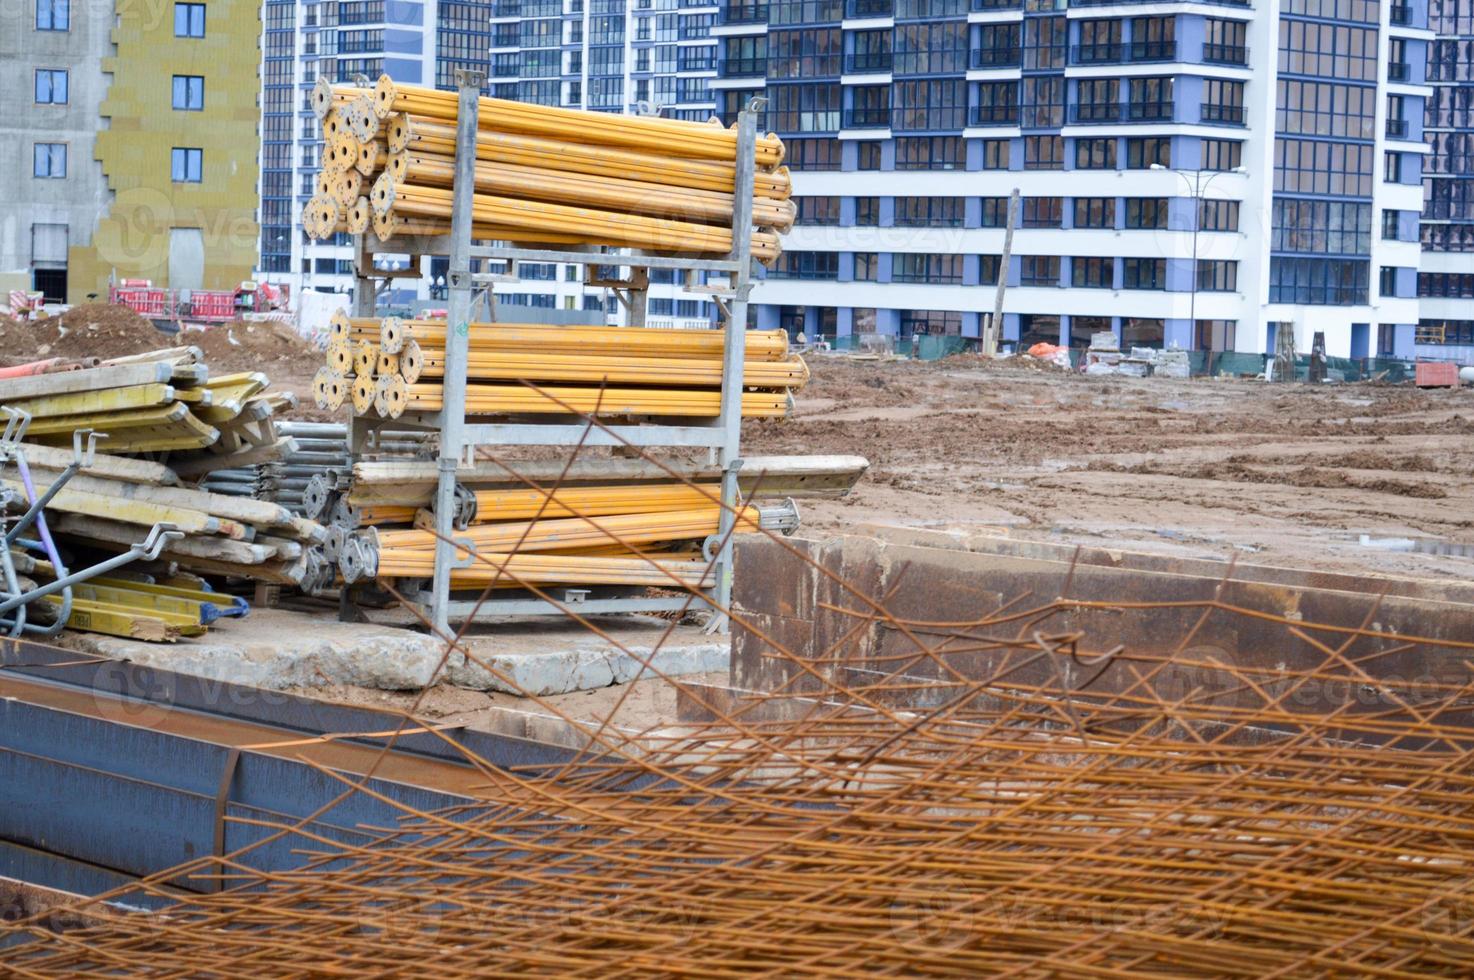 A lot of building materials with metal spare parts, sticks, beams, pipes at an open-air construction site warehouse photo